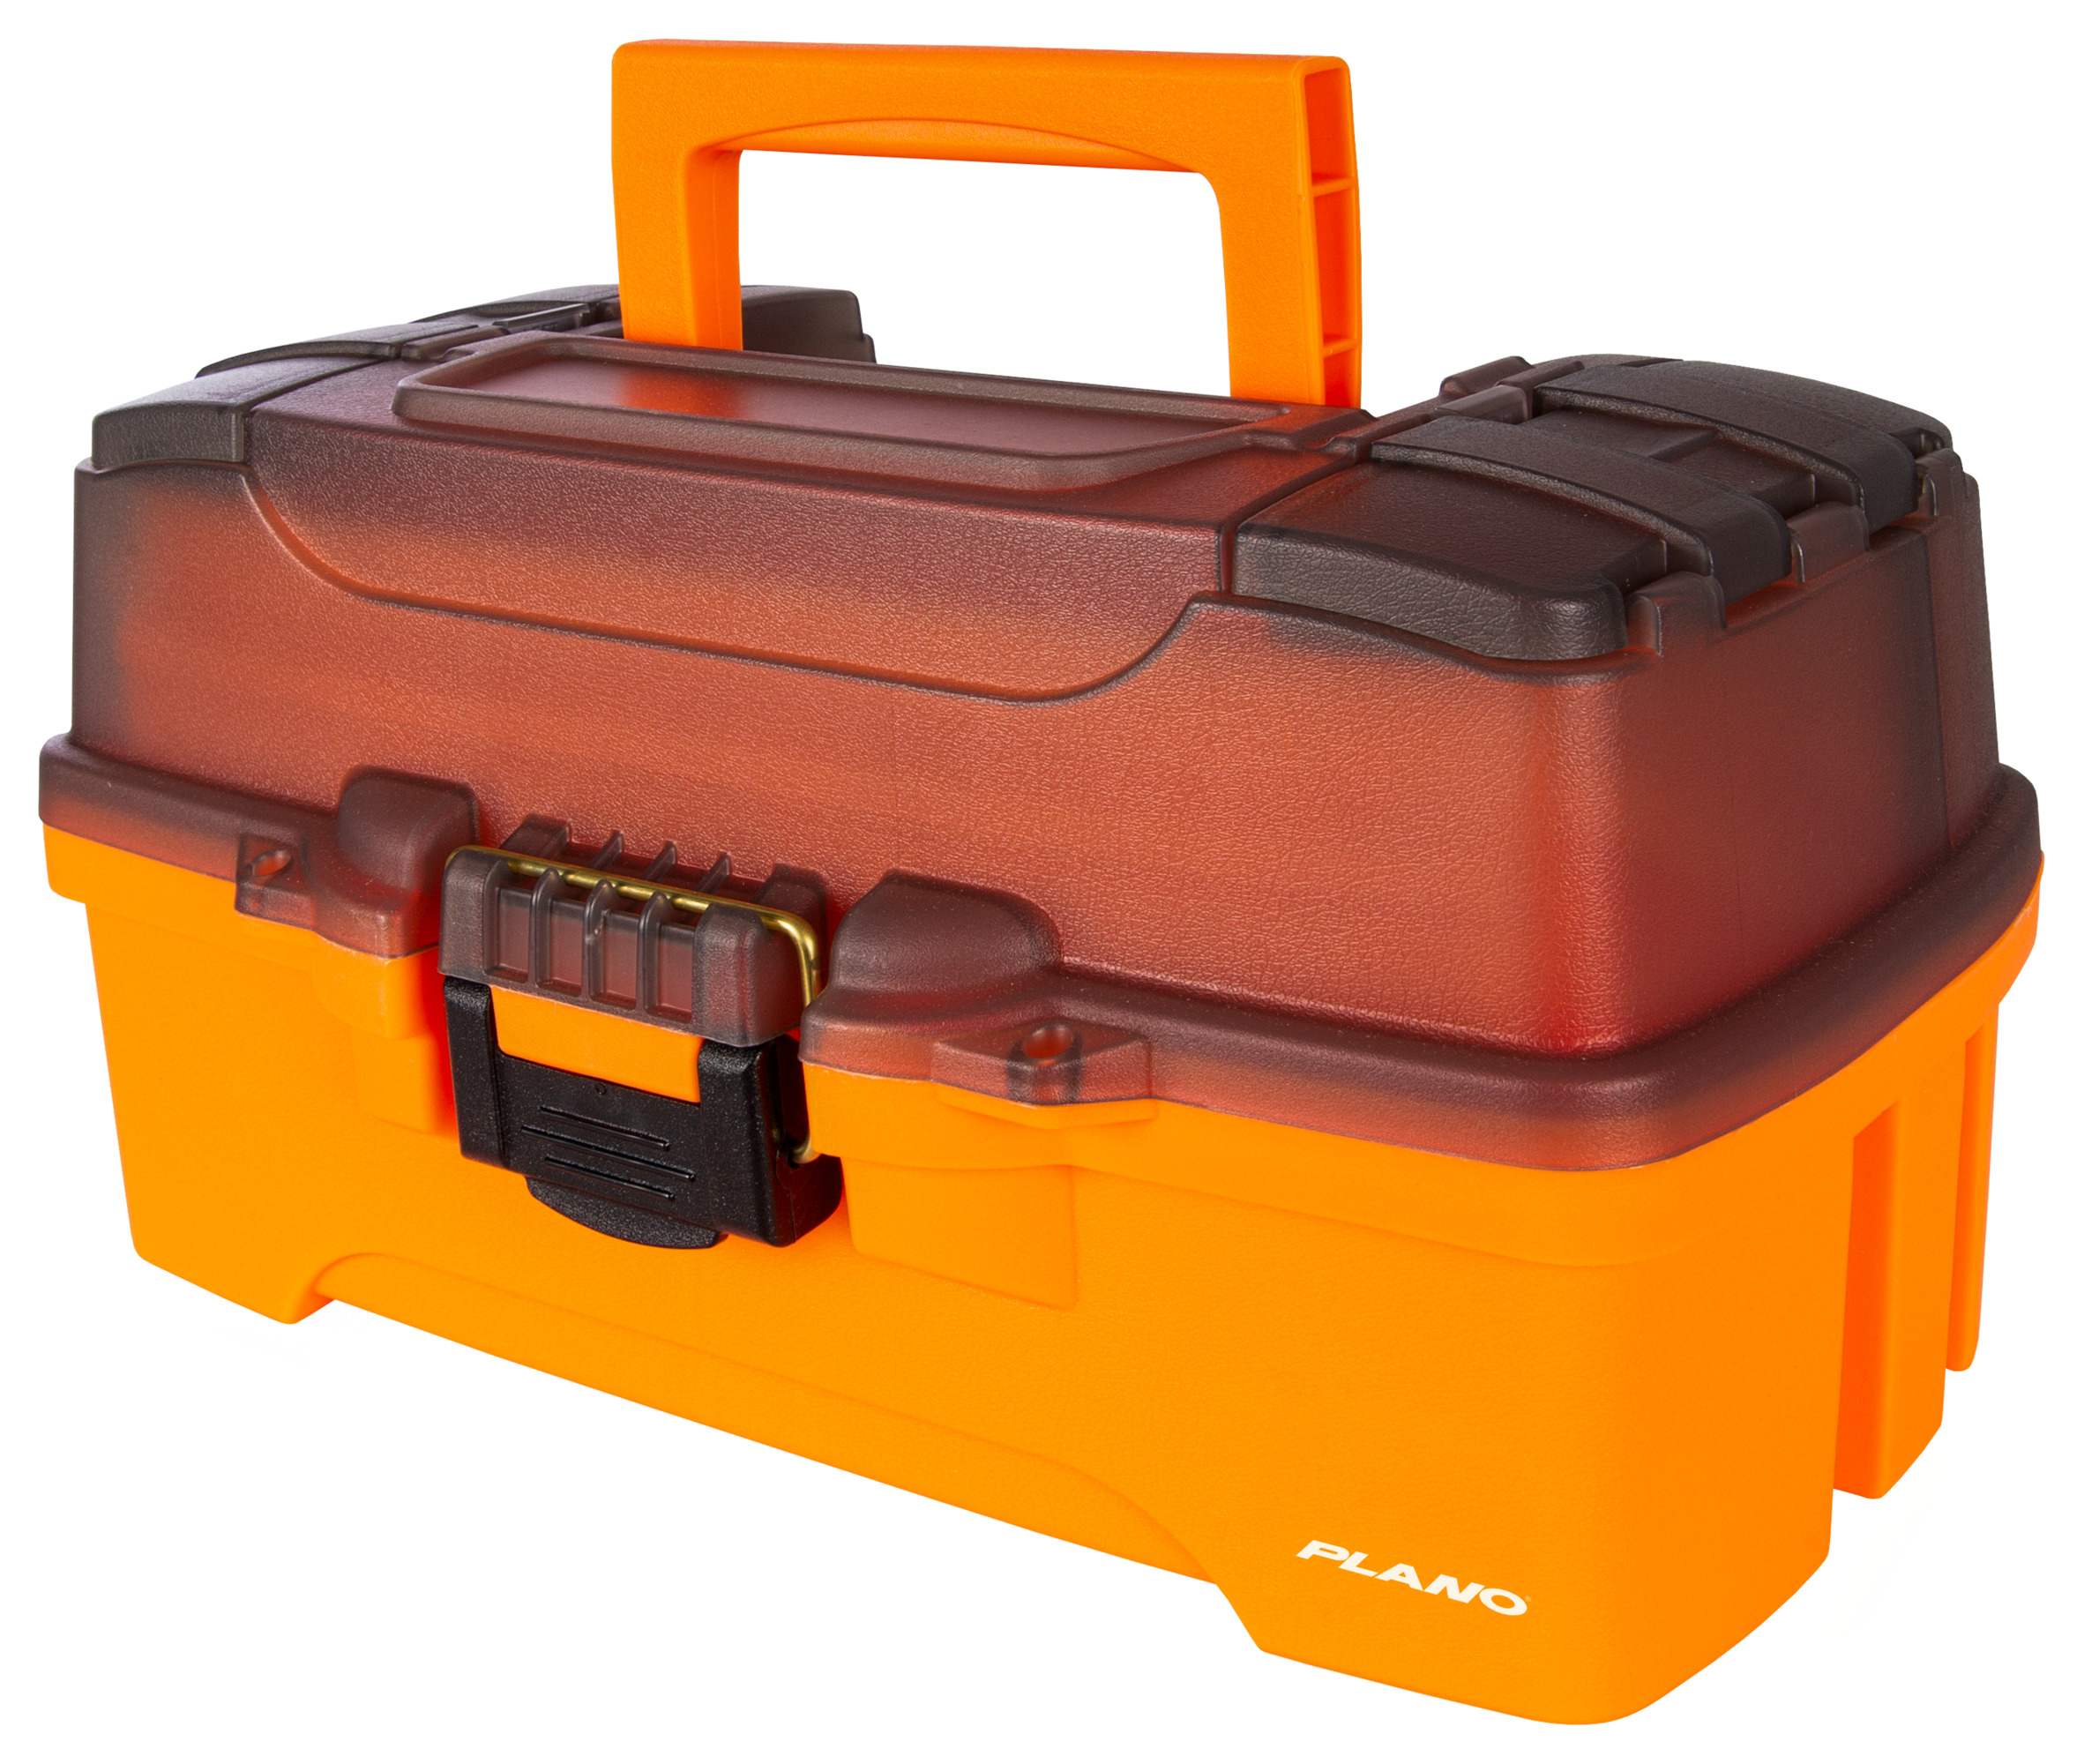 https://op2.0ps.us/original/opplanet-plano-trio-tackle-boxes-m